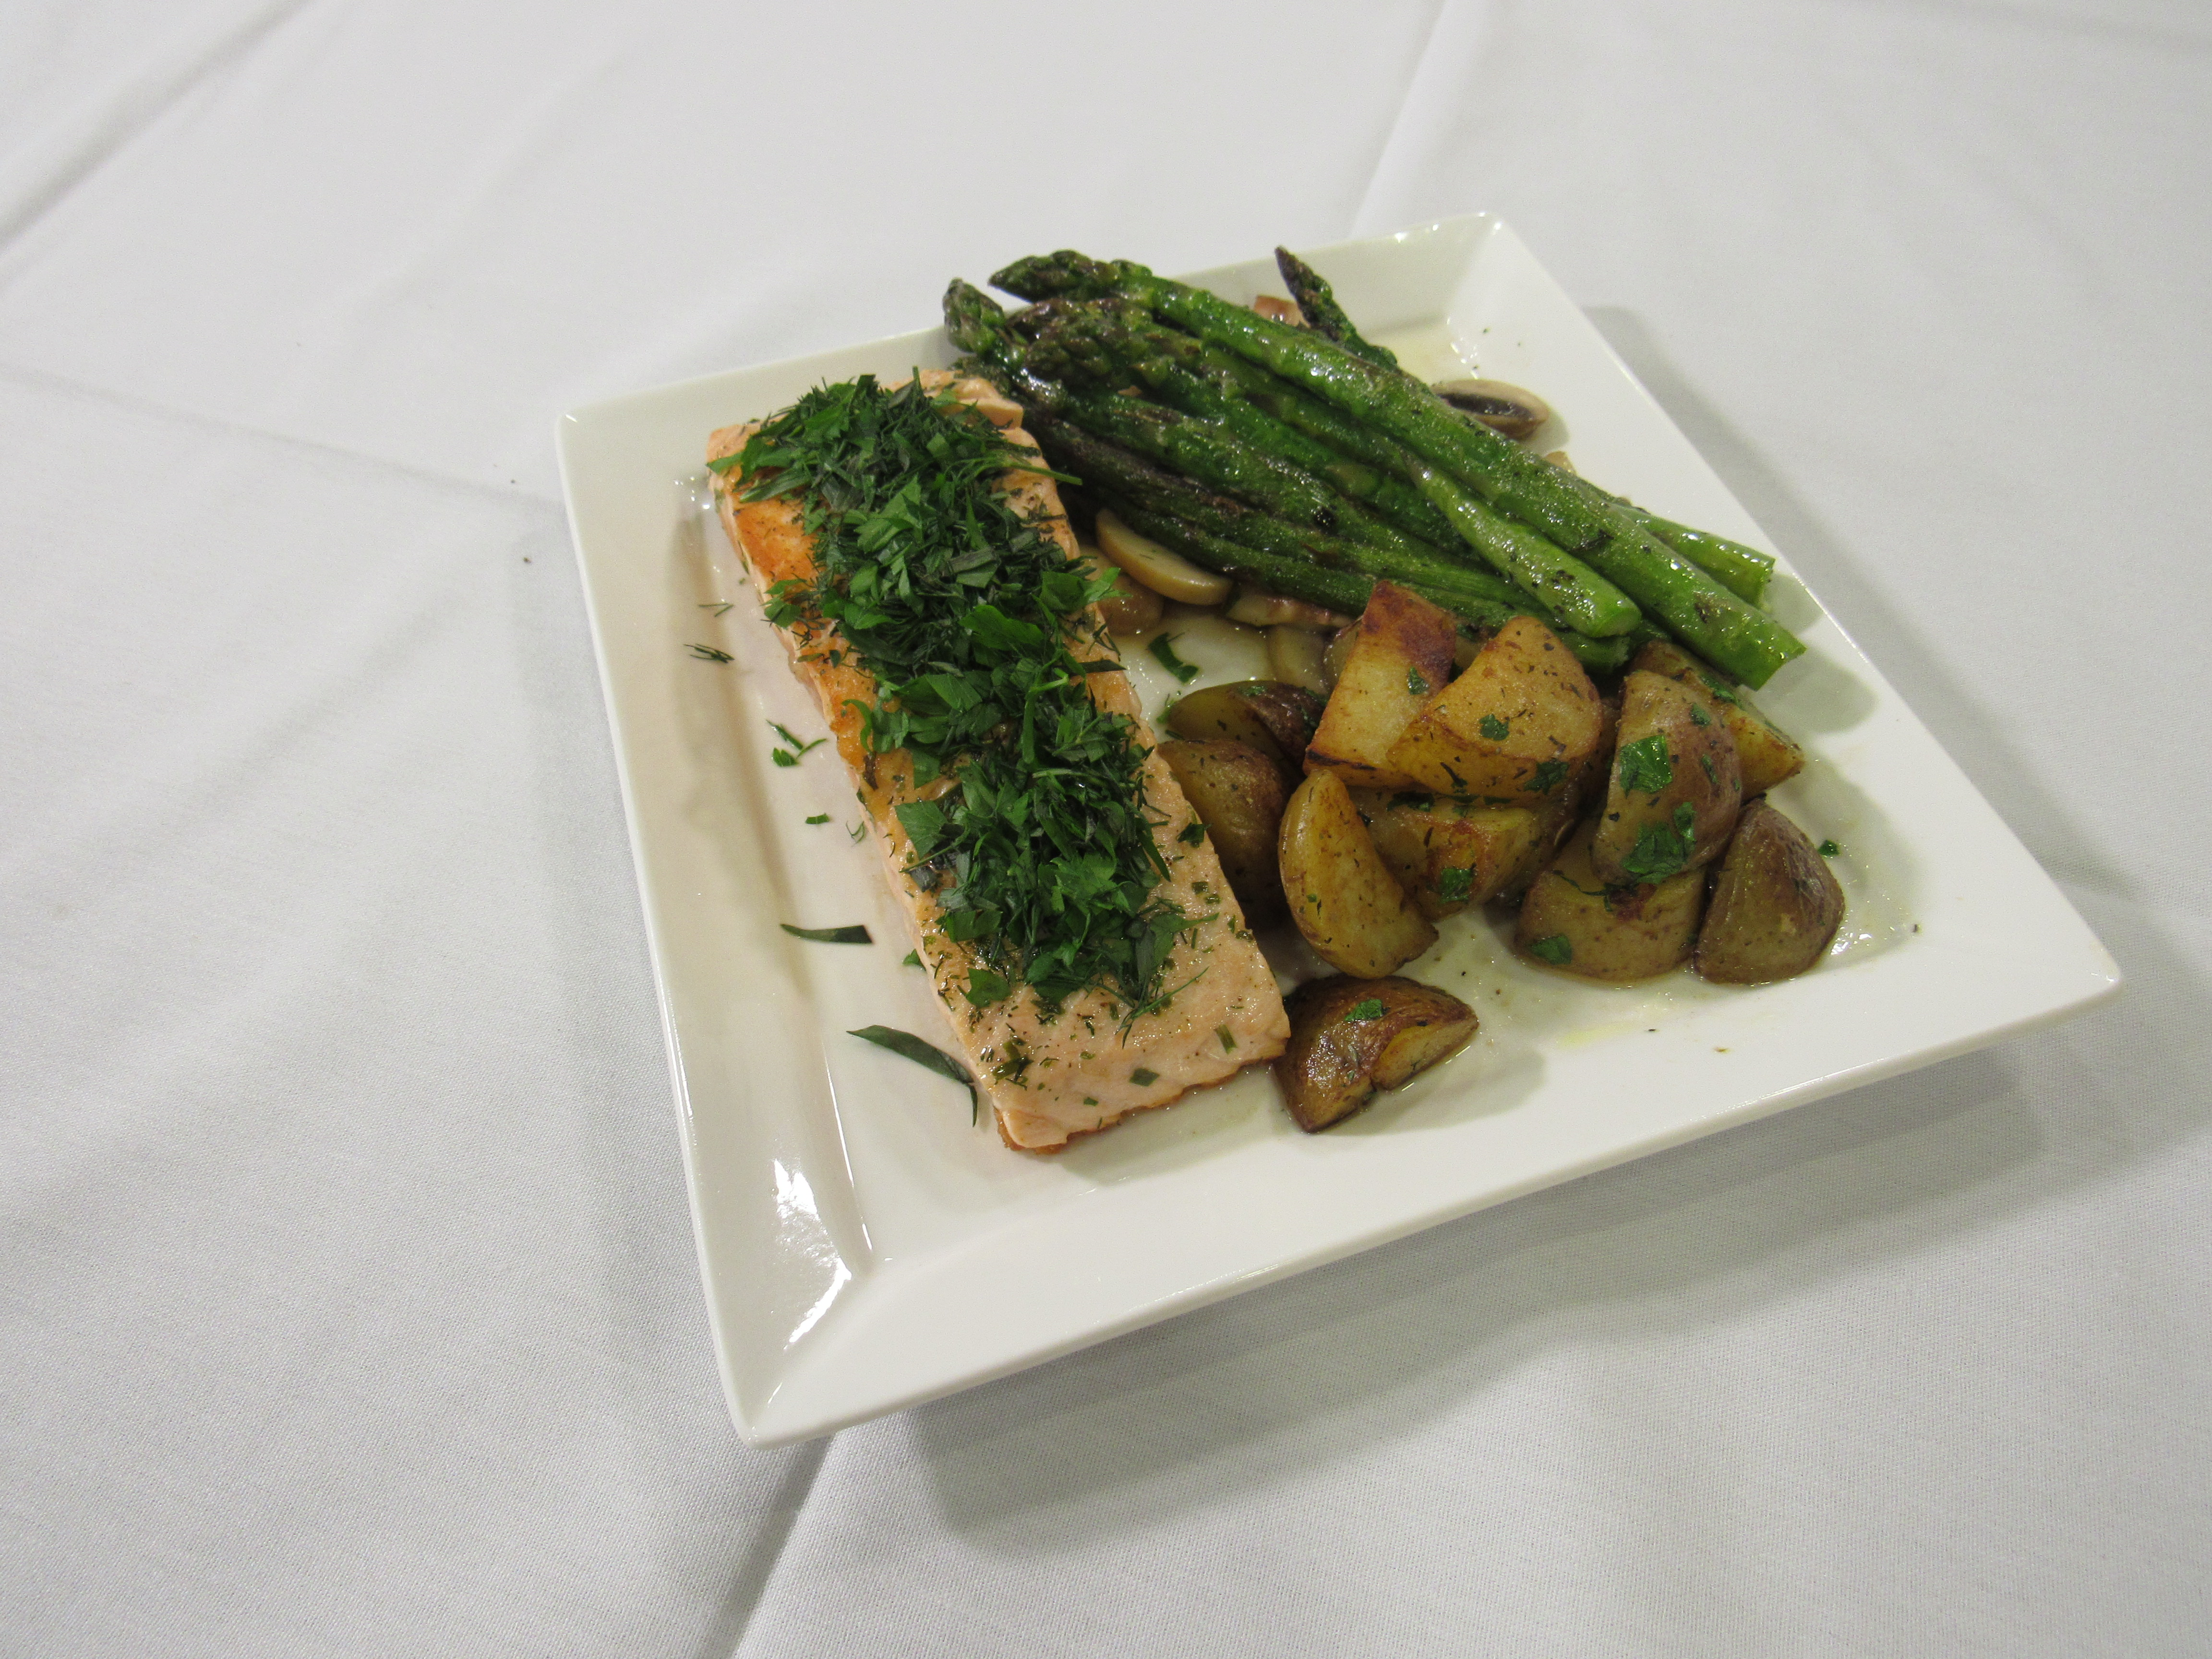 Salmon Fillet with Herbs